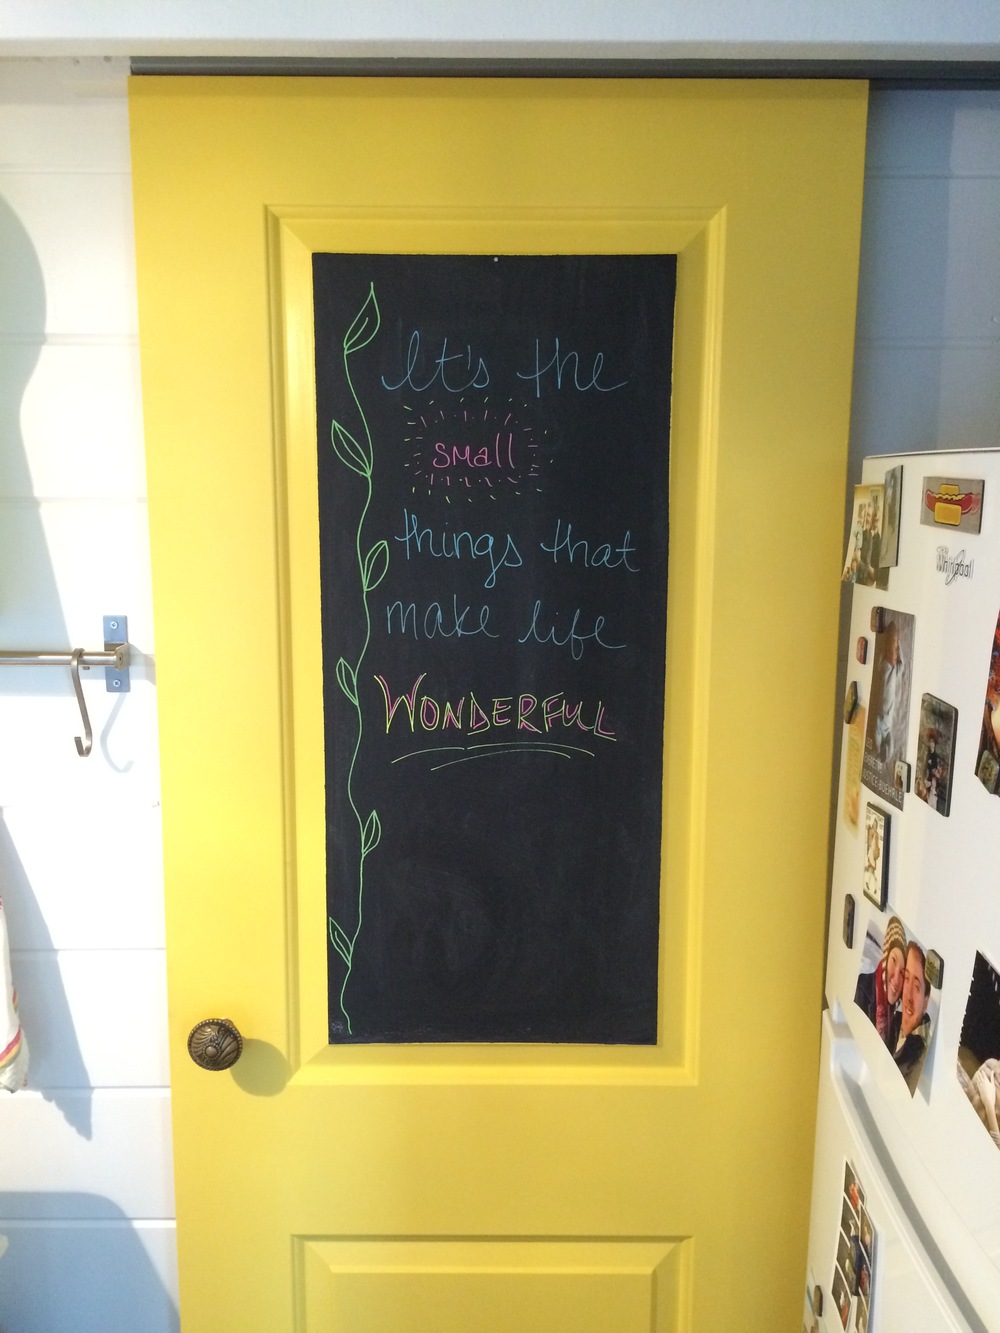  Our sliding yellow door to the bathroom. Has a chalkboard on it but our full-length mirror most often is hanging on it and covers the chalkboard. 